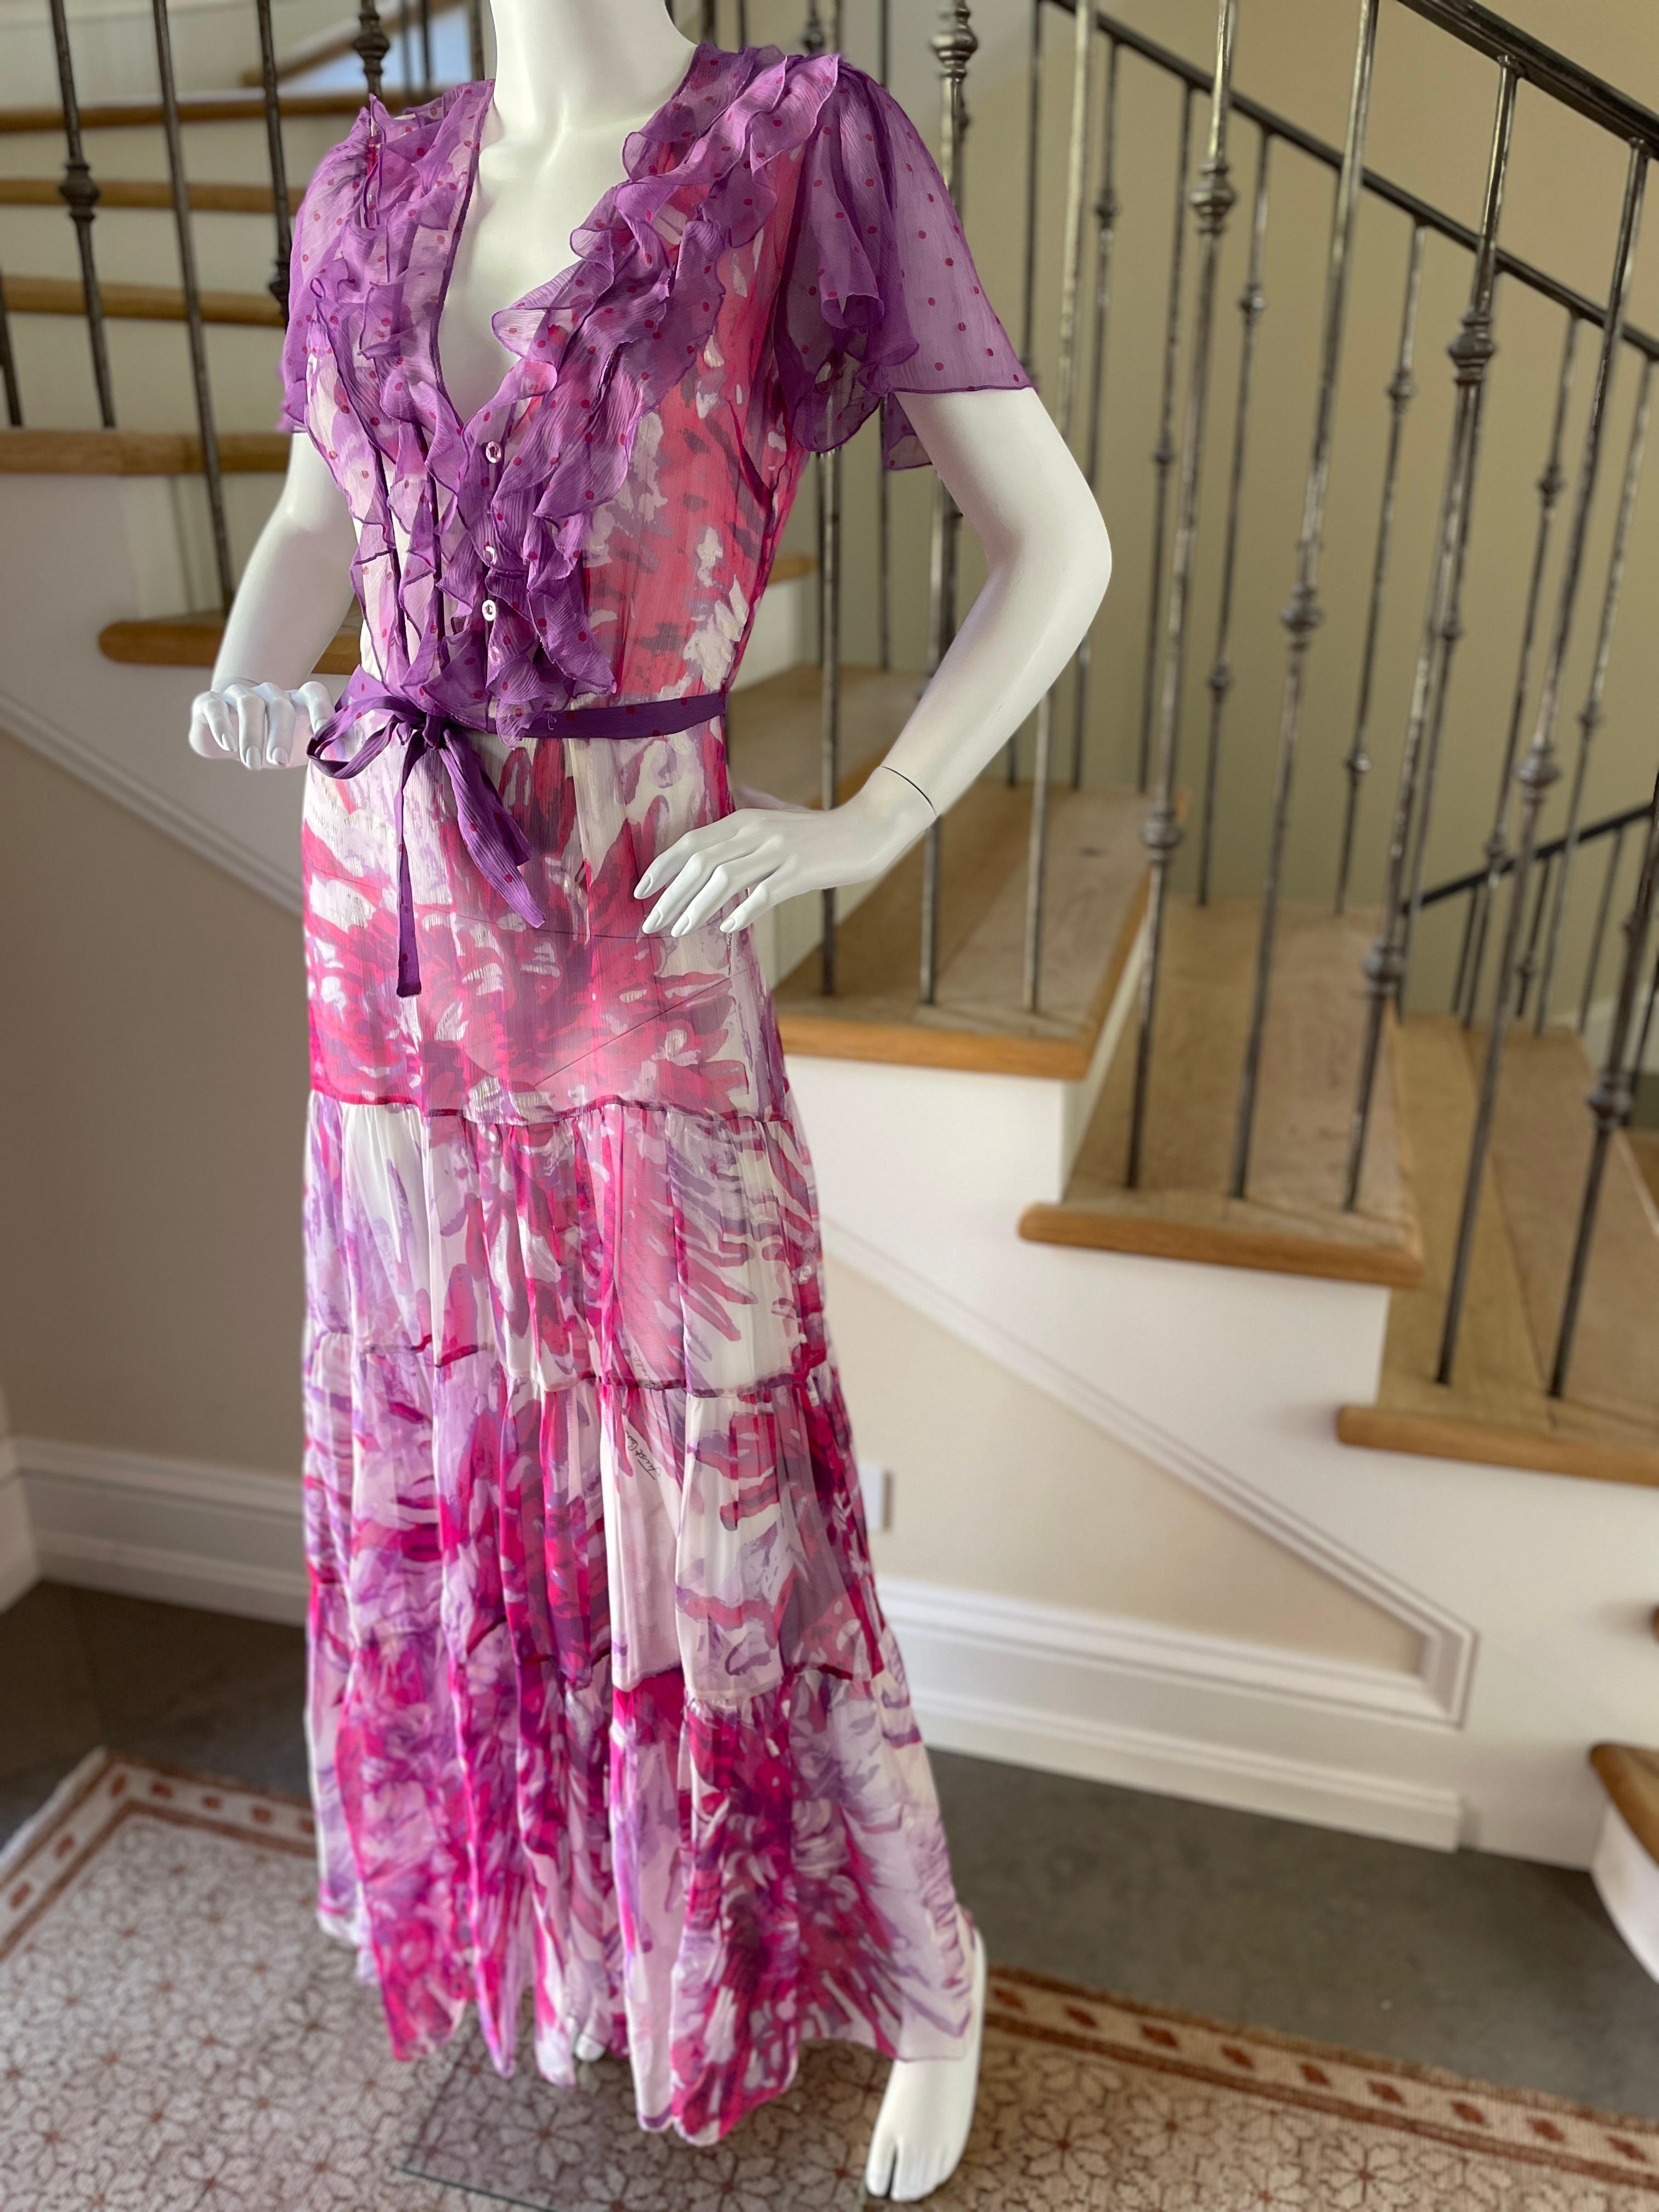 Roberto Cavalli Just Cavalli Vintage Sheer Silk Chiffon Dress with Flutter Sleeves
 Appx Size 40,no size label
 Bust 42